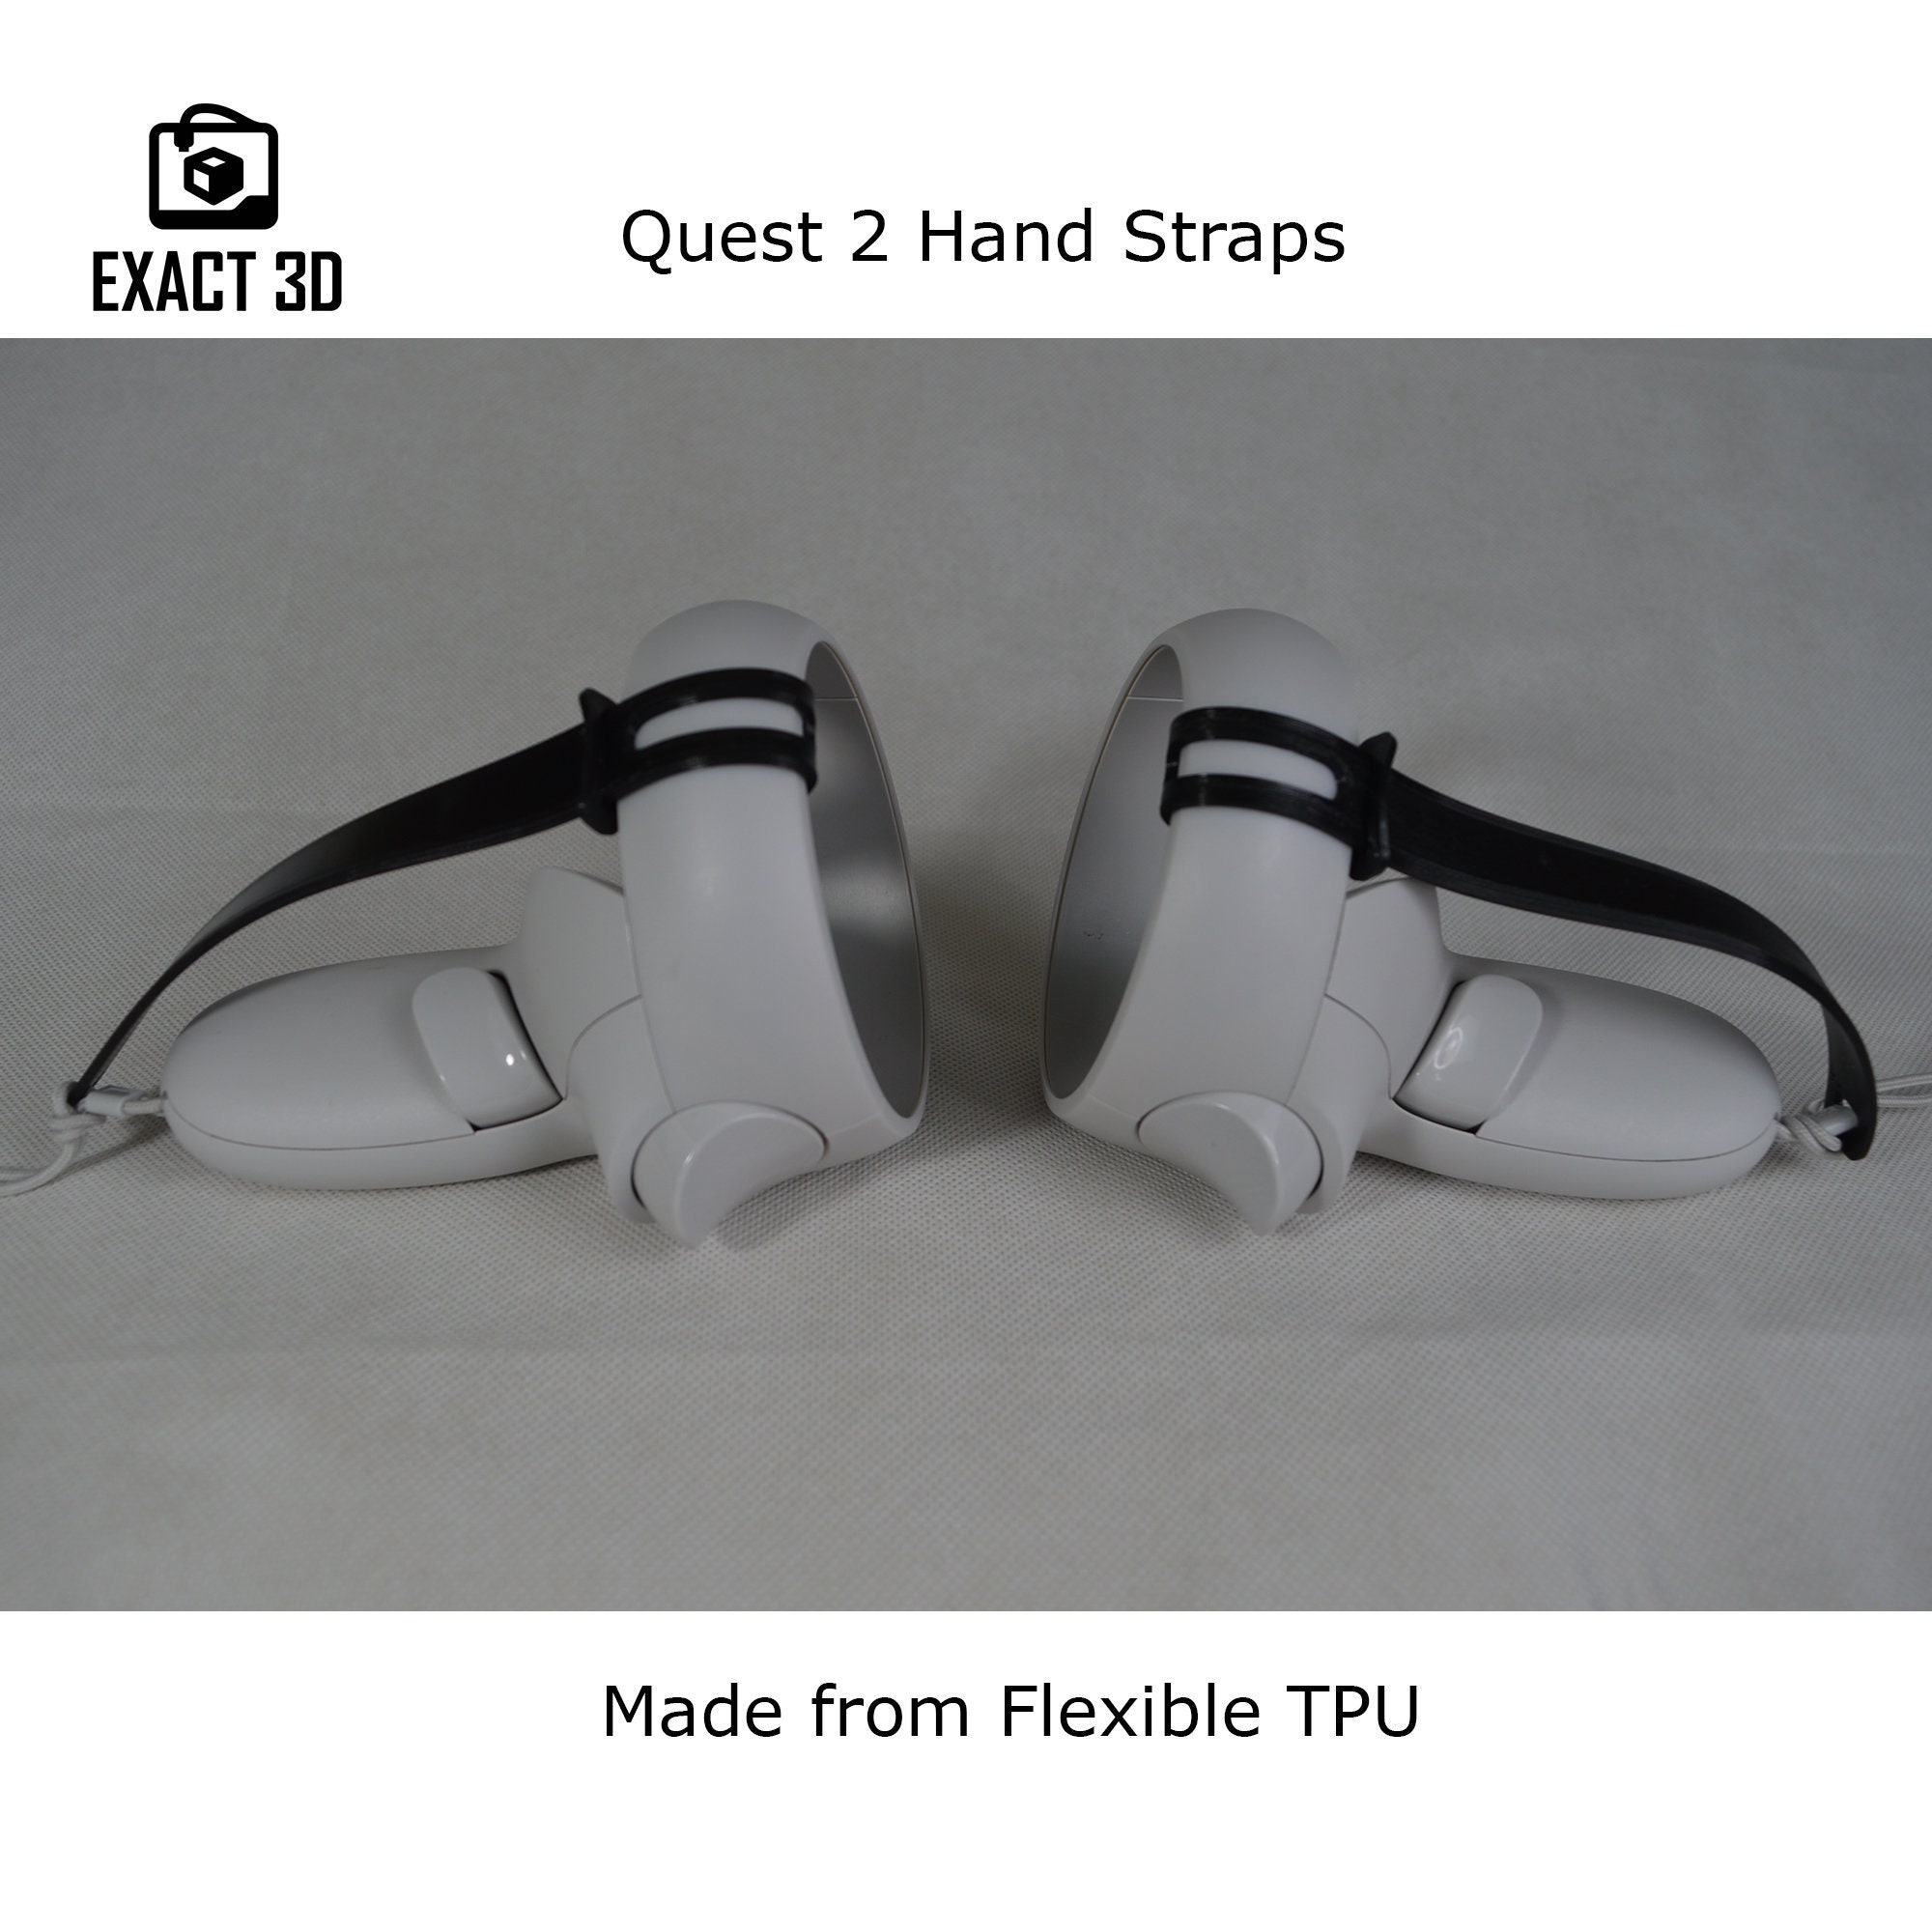 Adjustable Counterweight Compatible With Oculus Quest 3 and 2, Elite Strap,  Deluxe Audio Strap, Quest 1 and Eyglo/esimen/kiwi/etc, Halo 